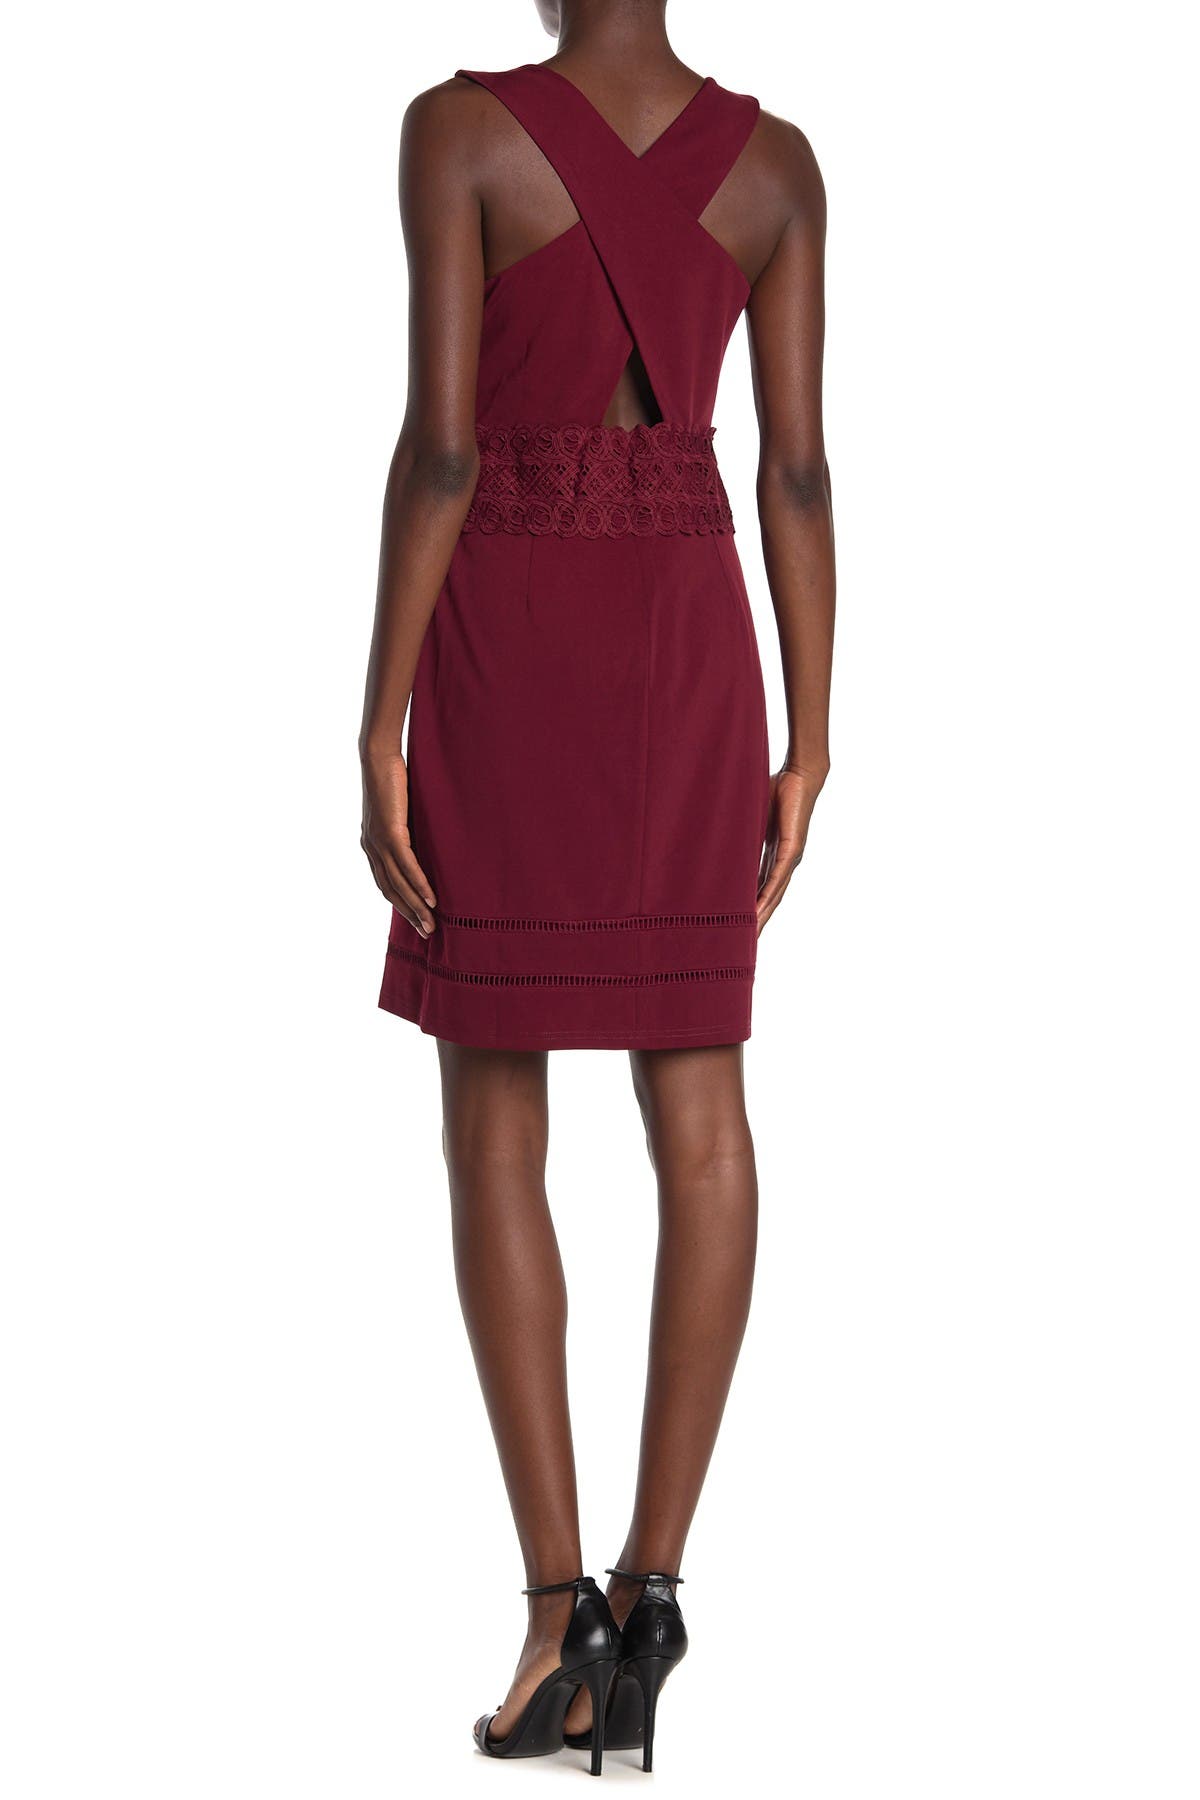 Adelyn Rae Embroidered Criss-cross Back Sheath Dress In Dark Red2